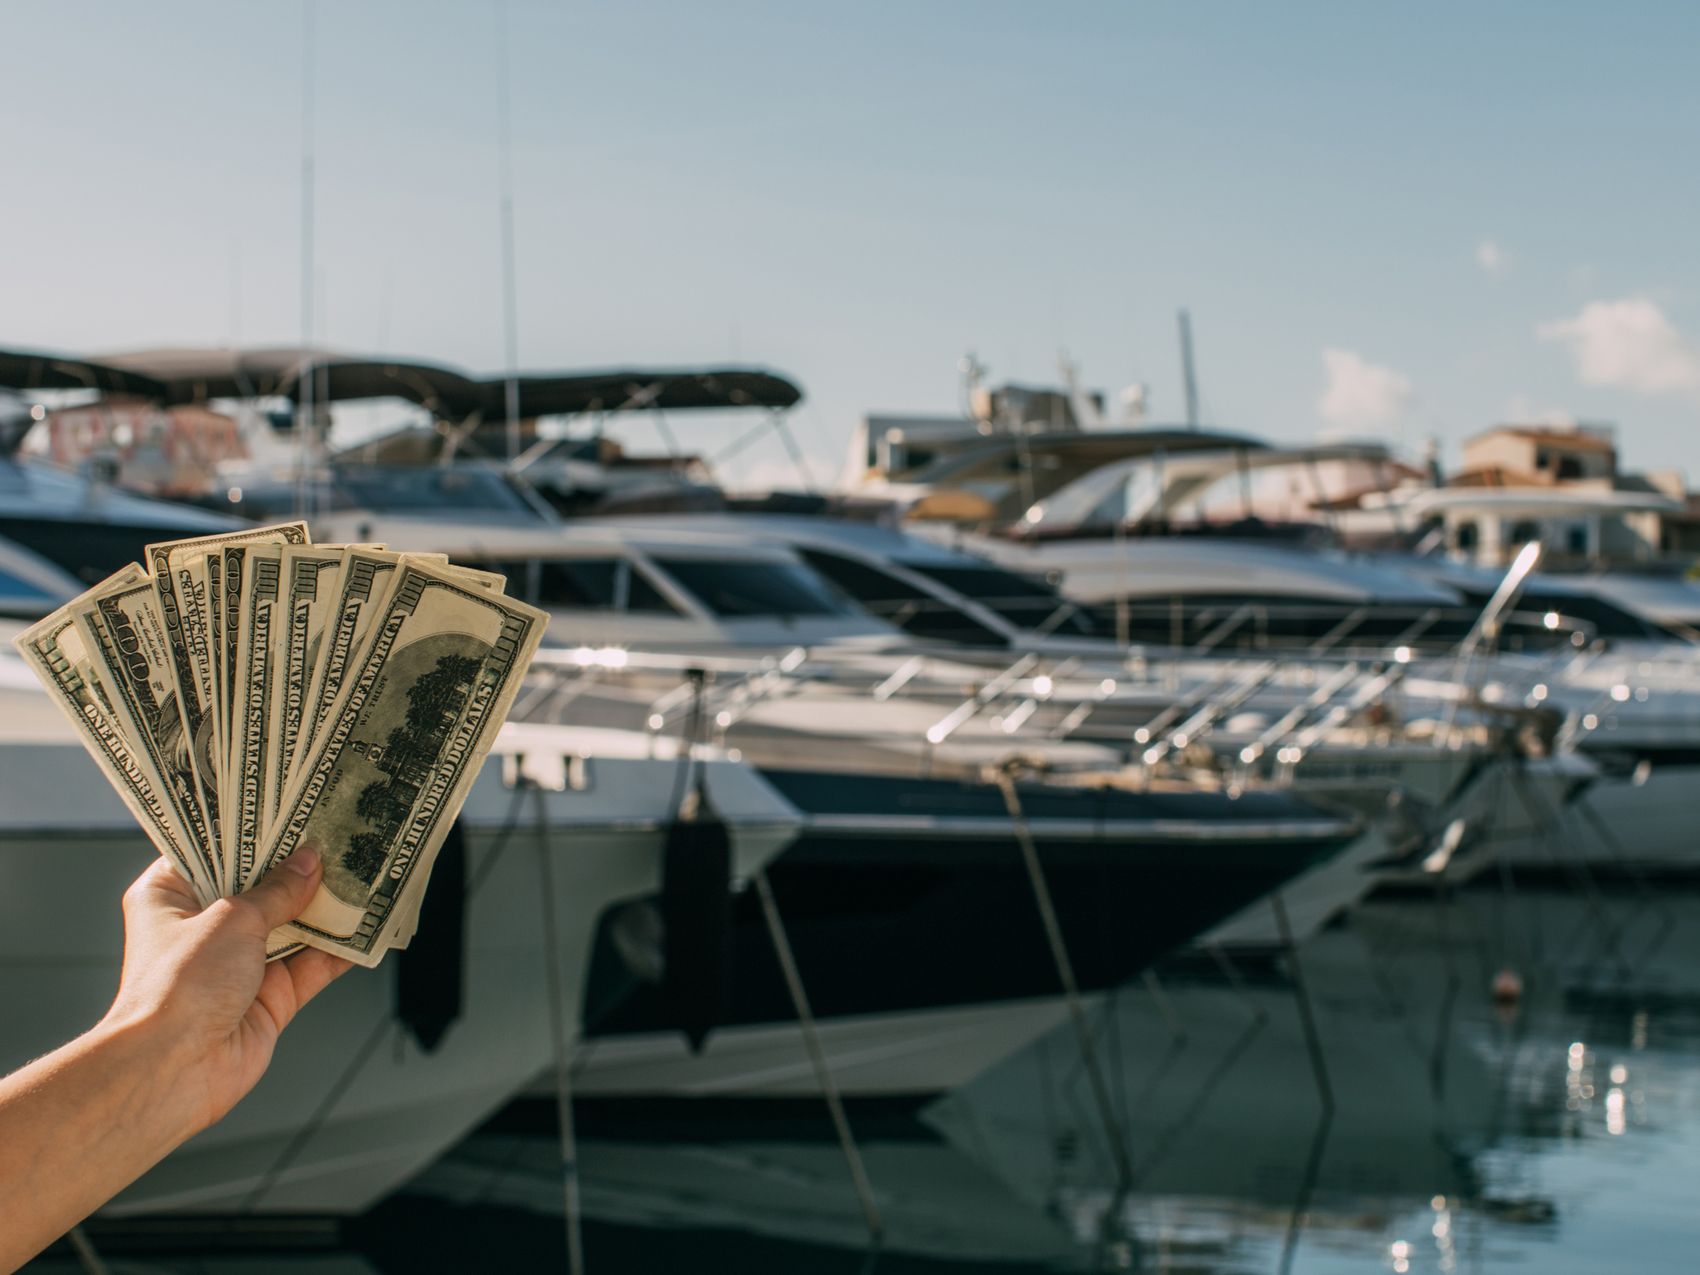 Hand holding money in marina in front of yachts.